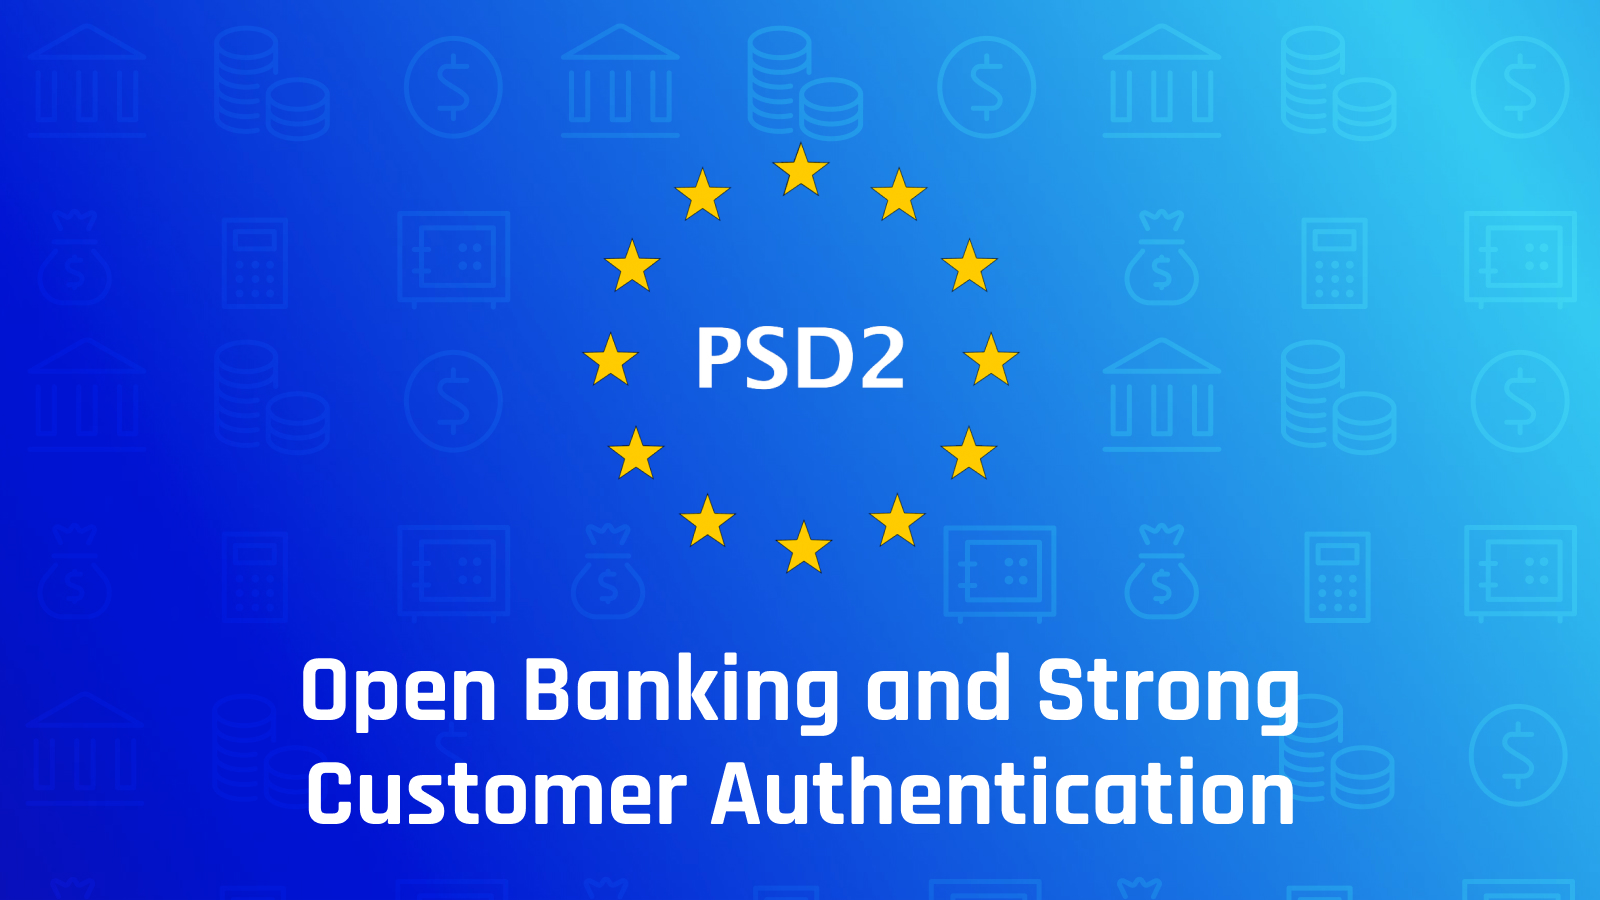 Open Banking, PSD2, and Strong Customer Authentication